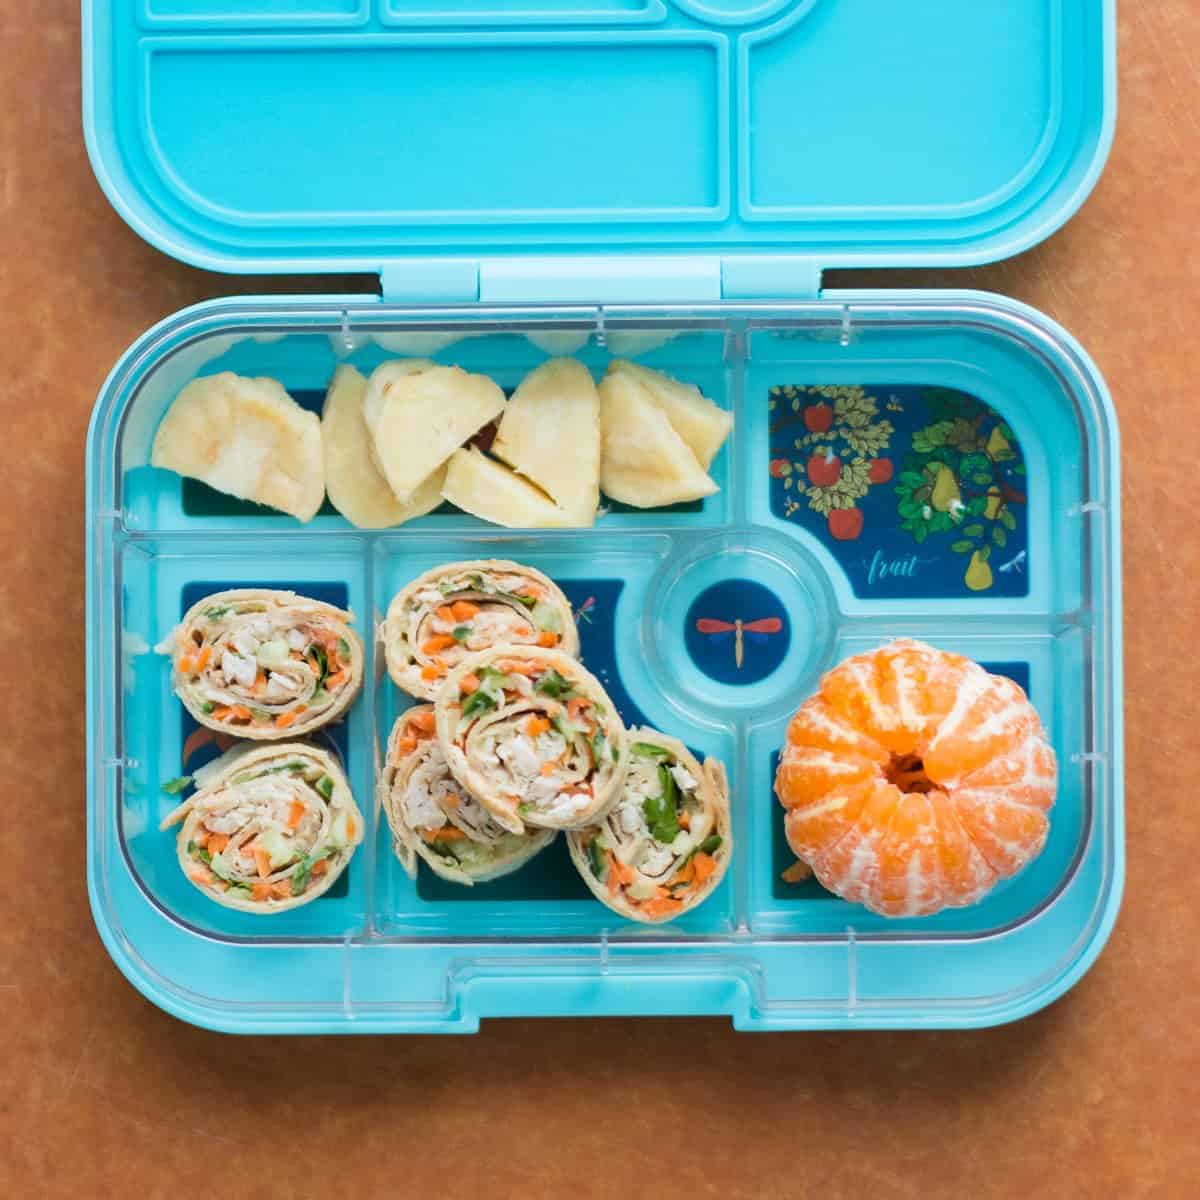 roll ups in a blue compartmentalized lunch box with parsnips and clementine.